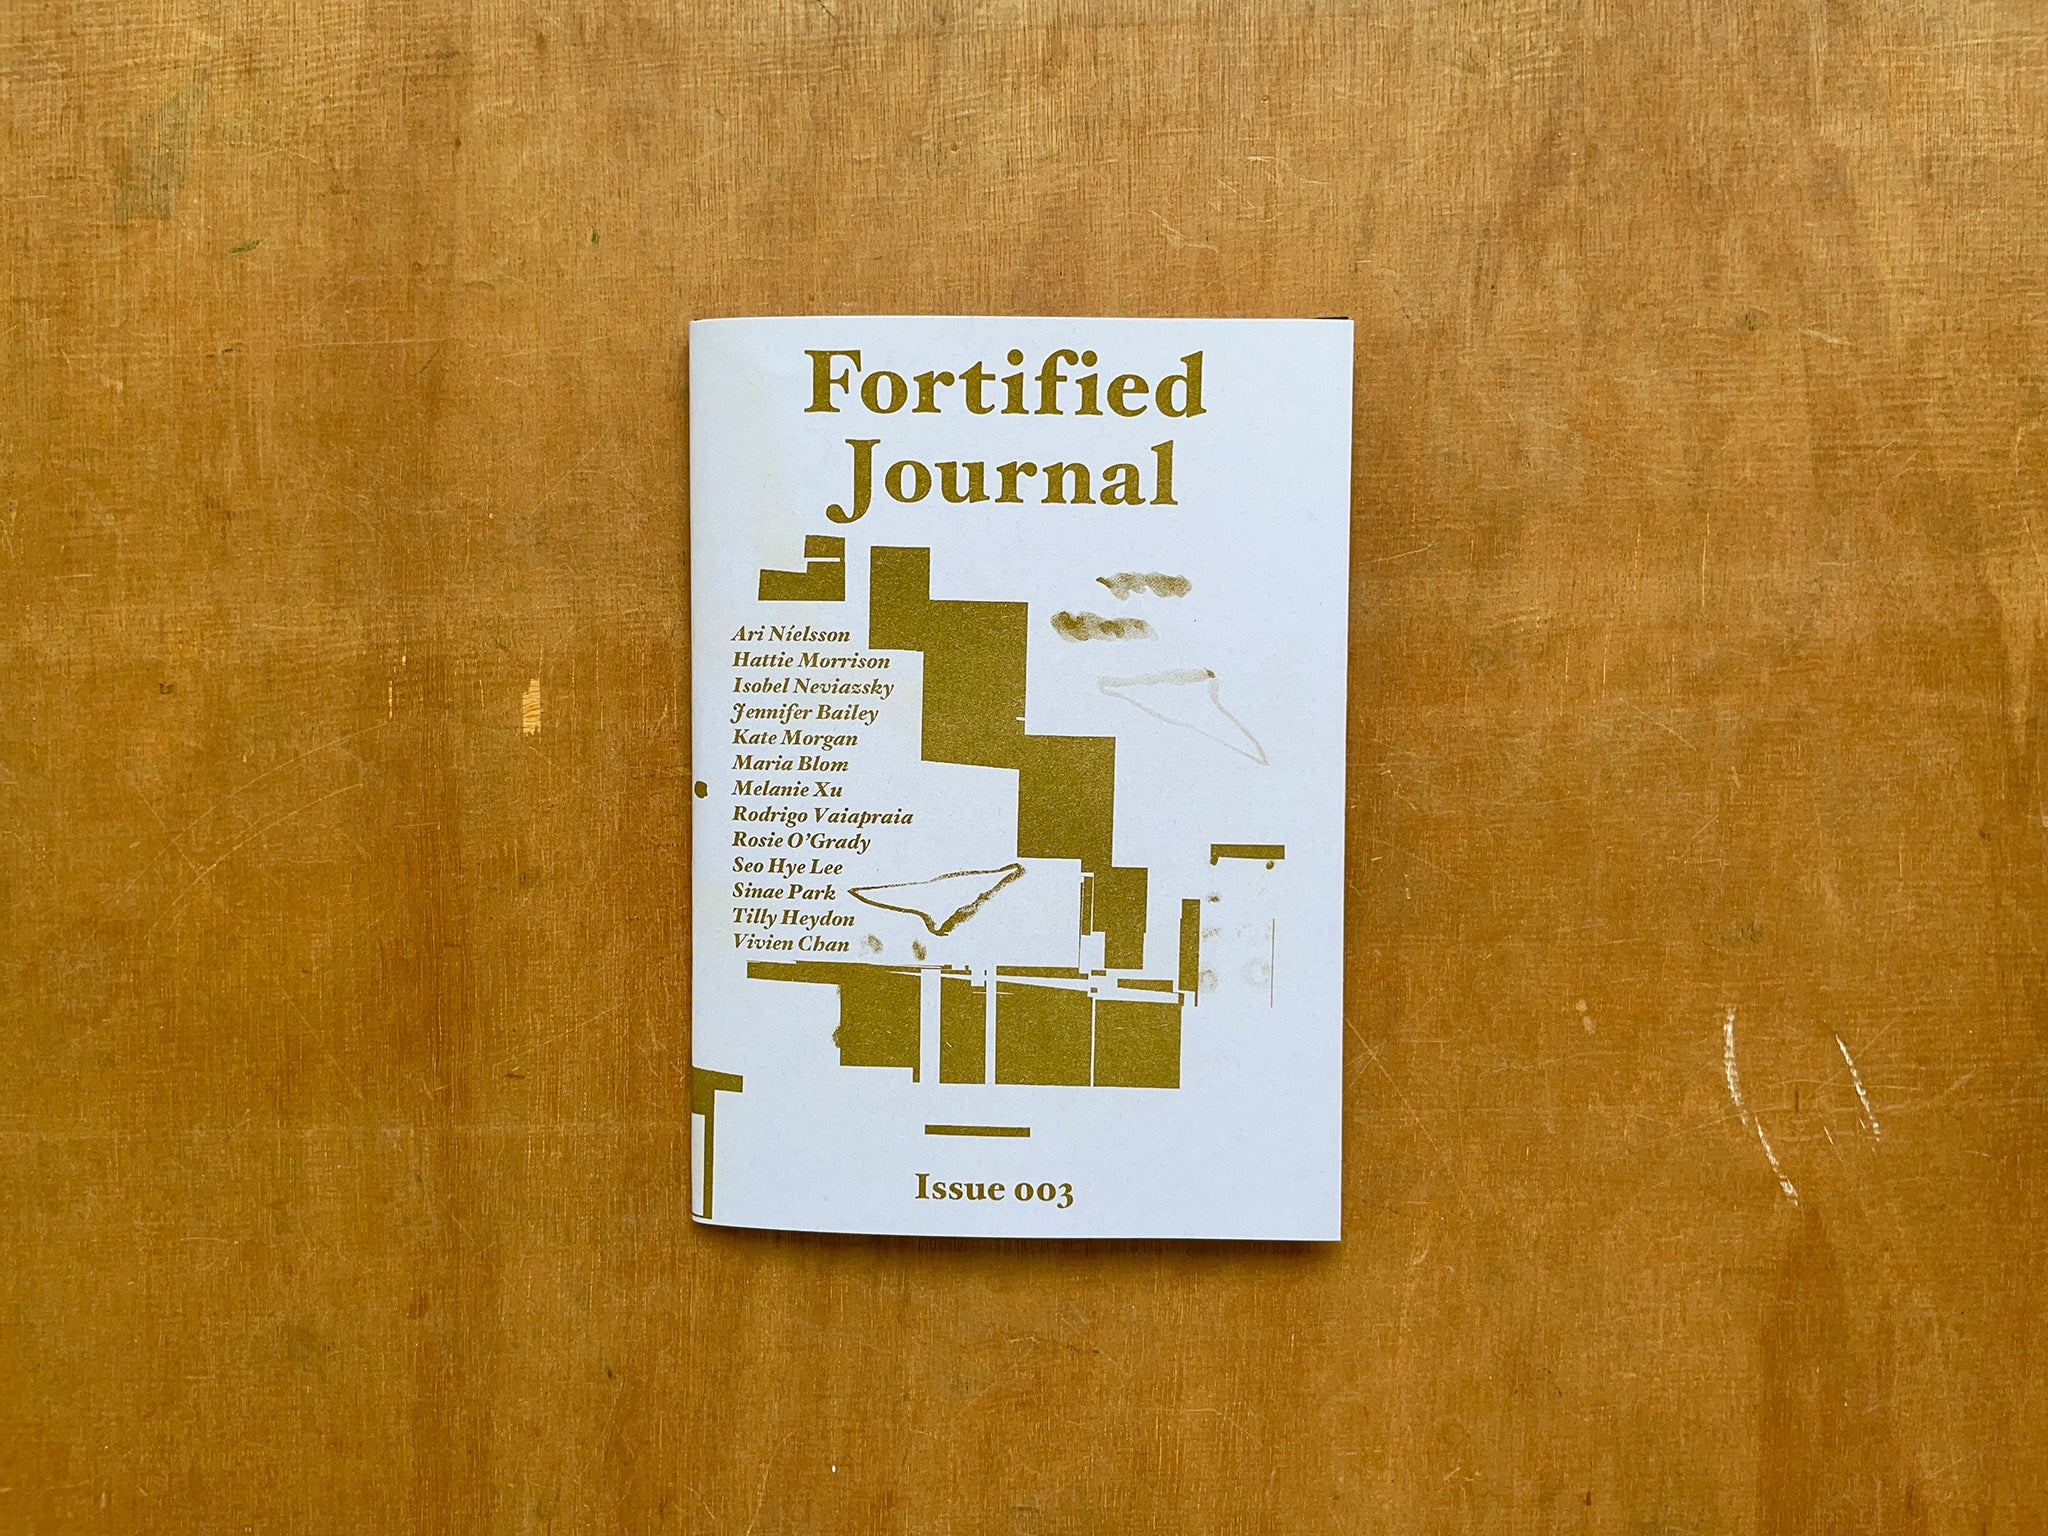 FORTIFIED JOURNAL ISSUE 003